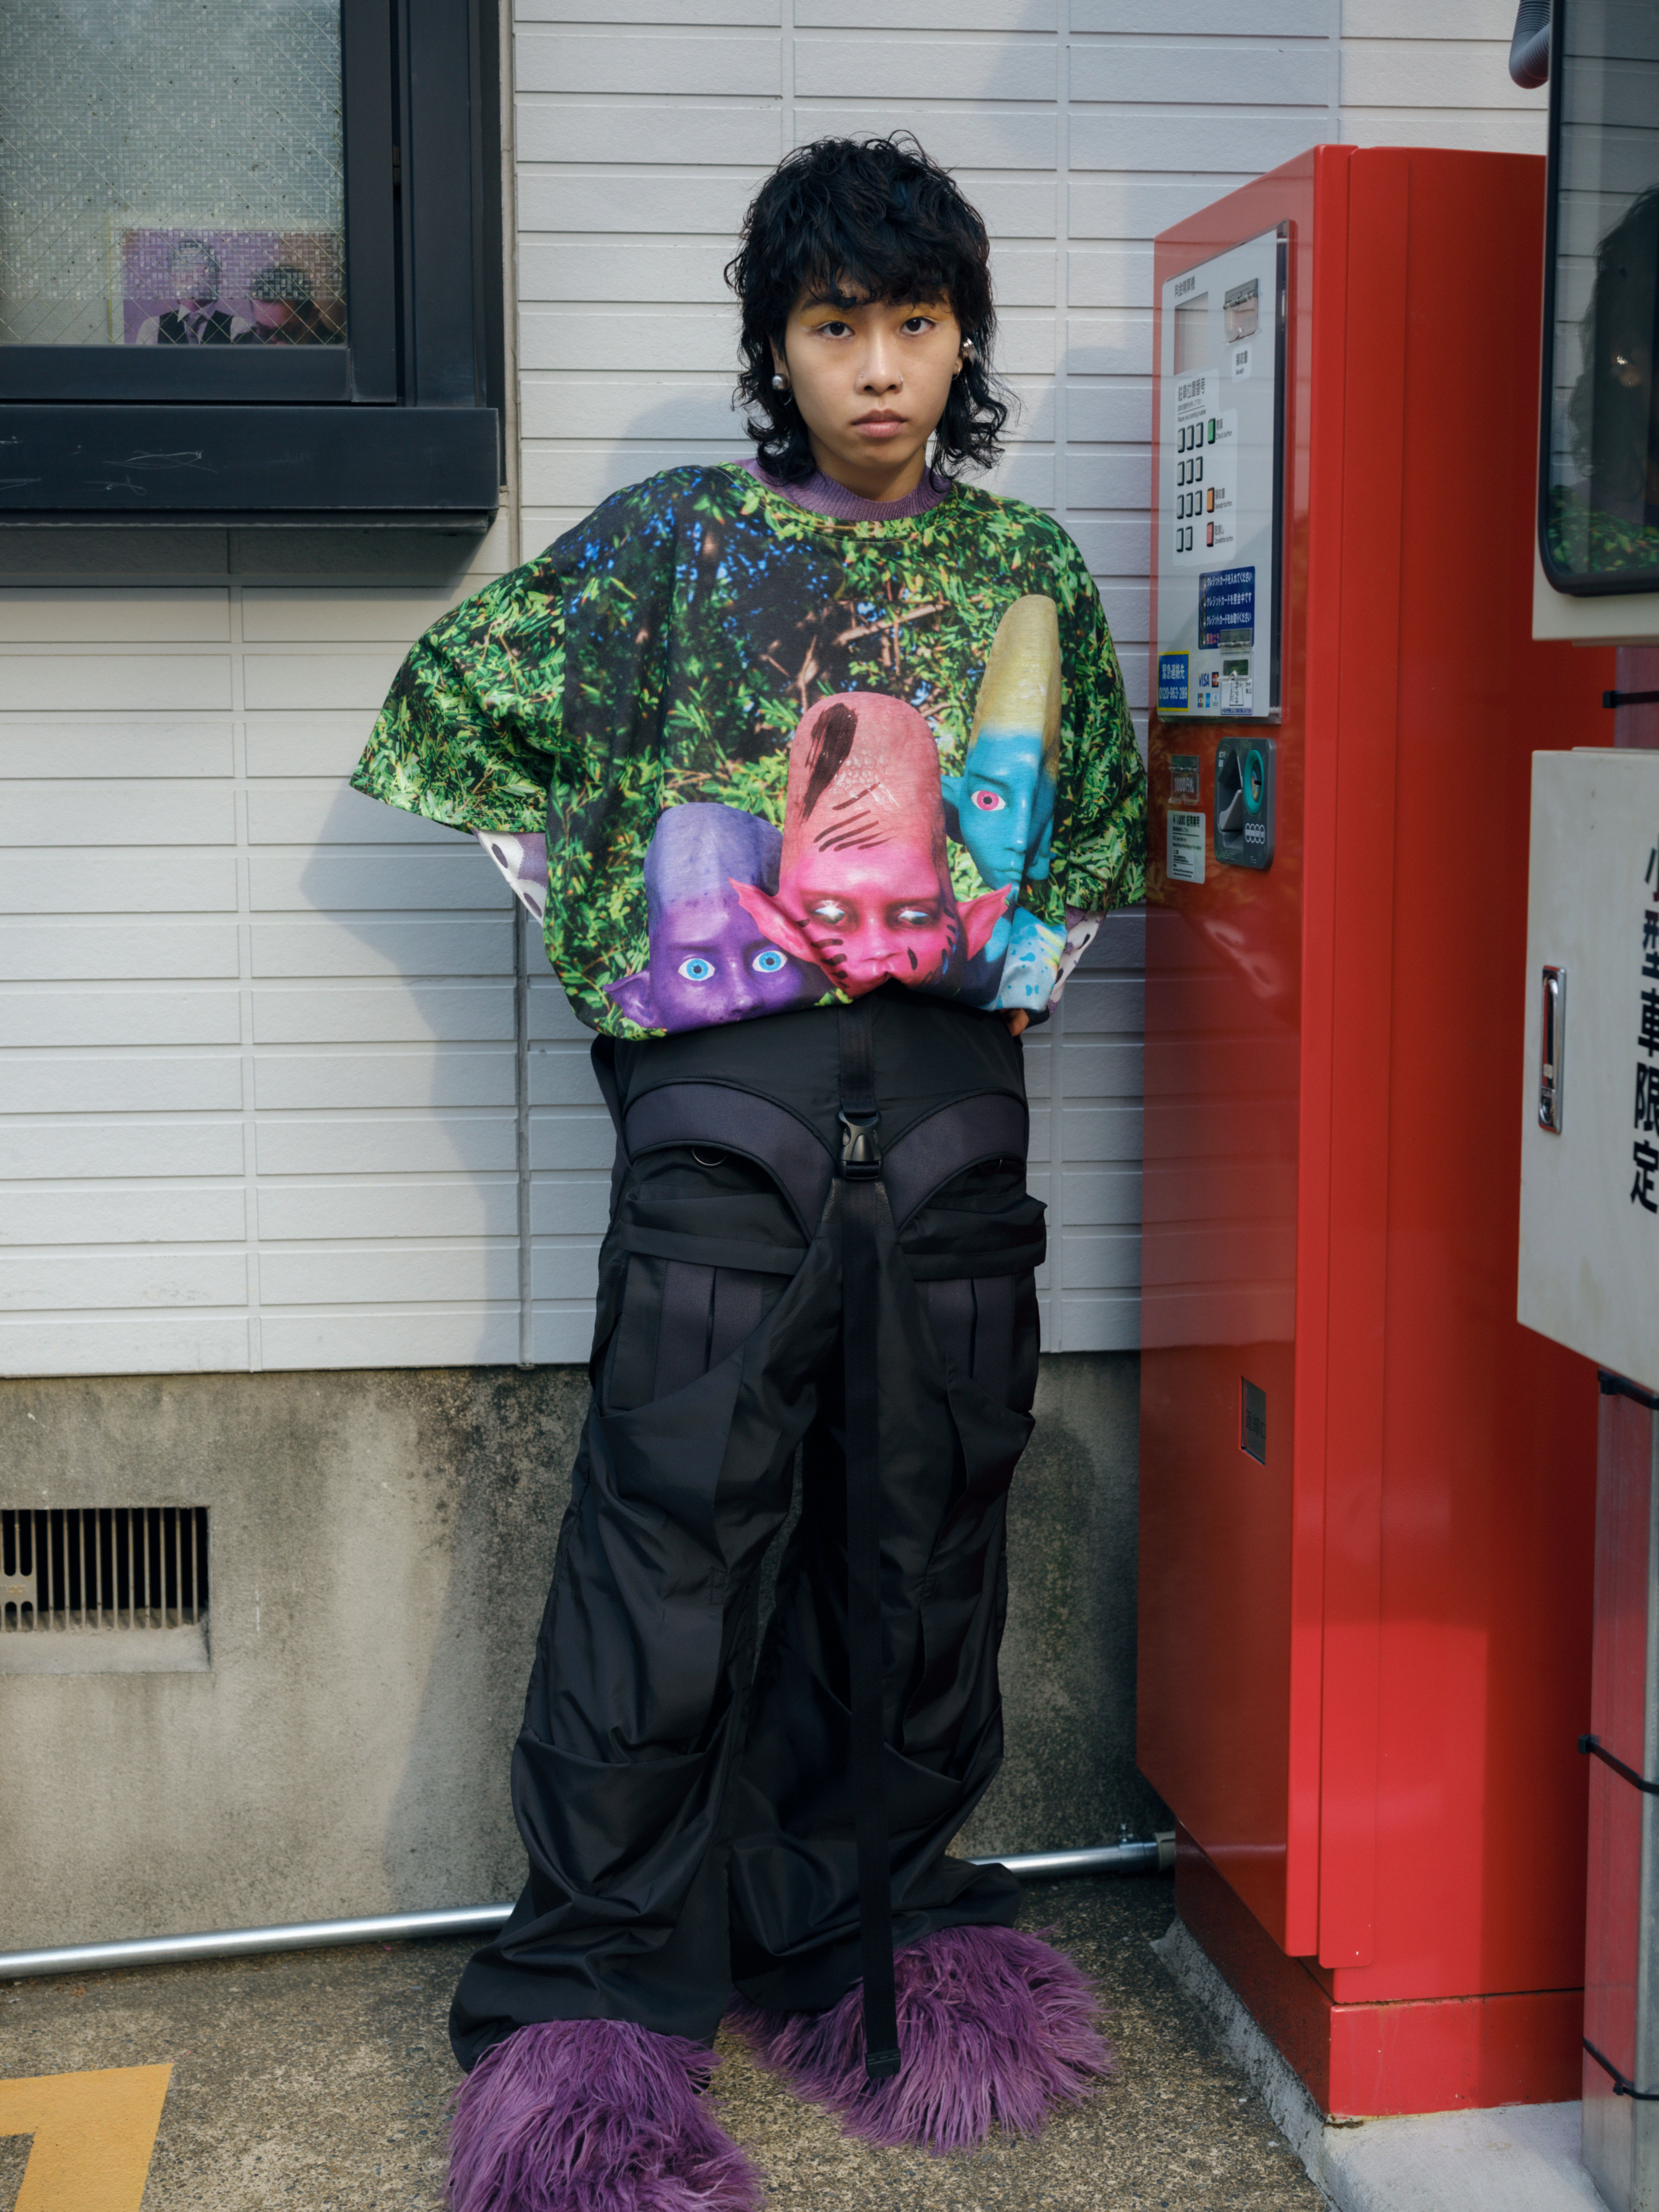 a person in a colorful patterned t-shirt, combat pants, and big purple fluffy shoes stands next to a vending machine